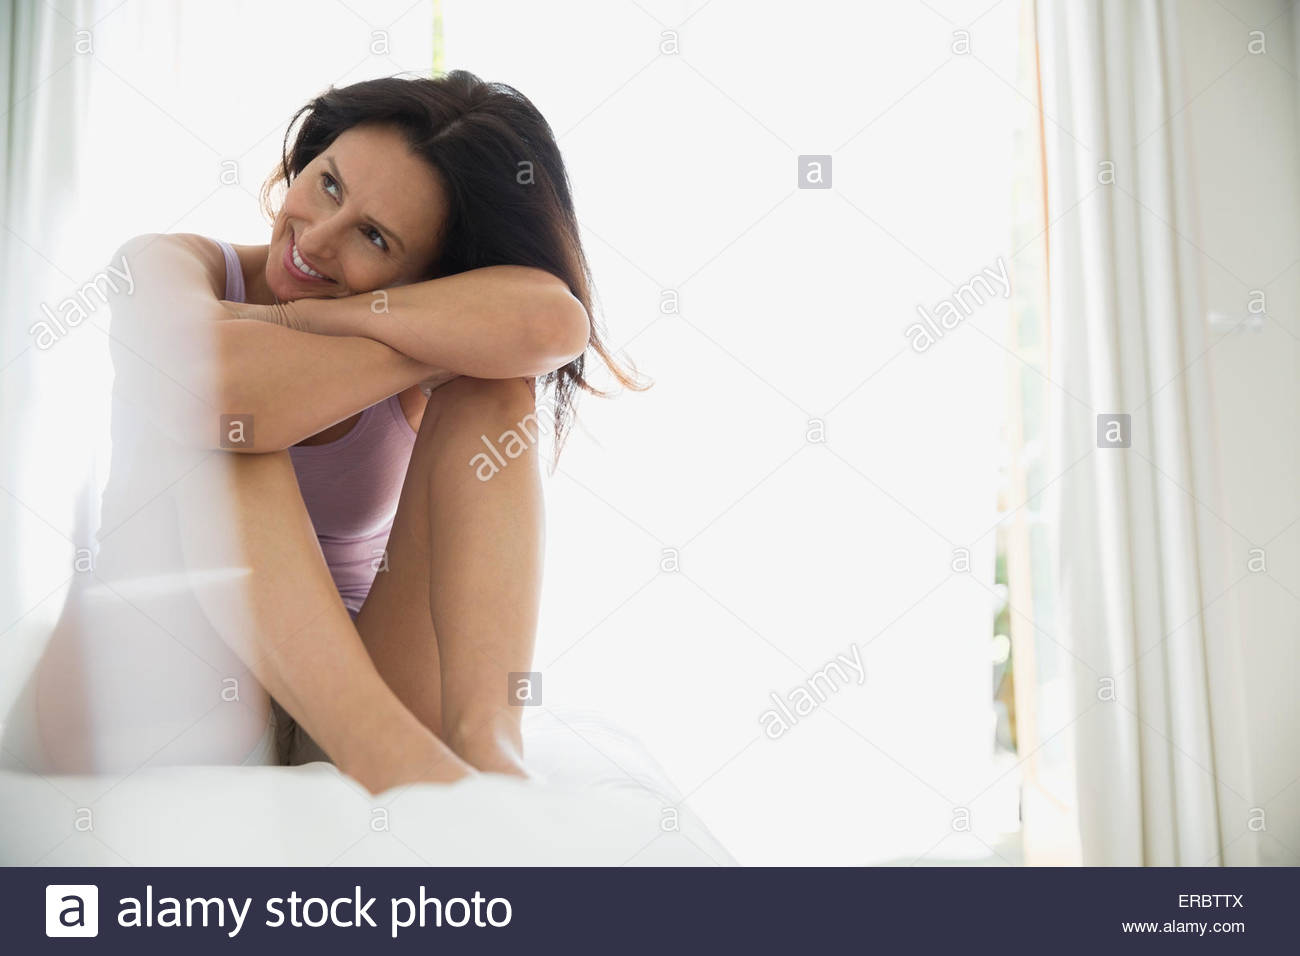 Smiling brunette woman hugging knees on bed Stock Photo